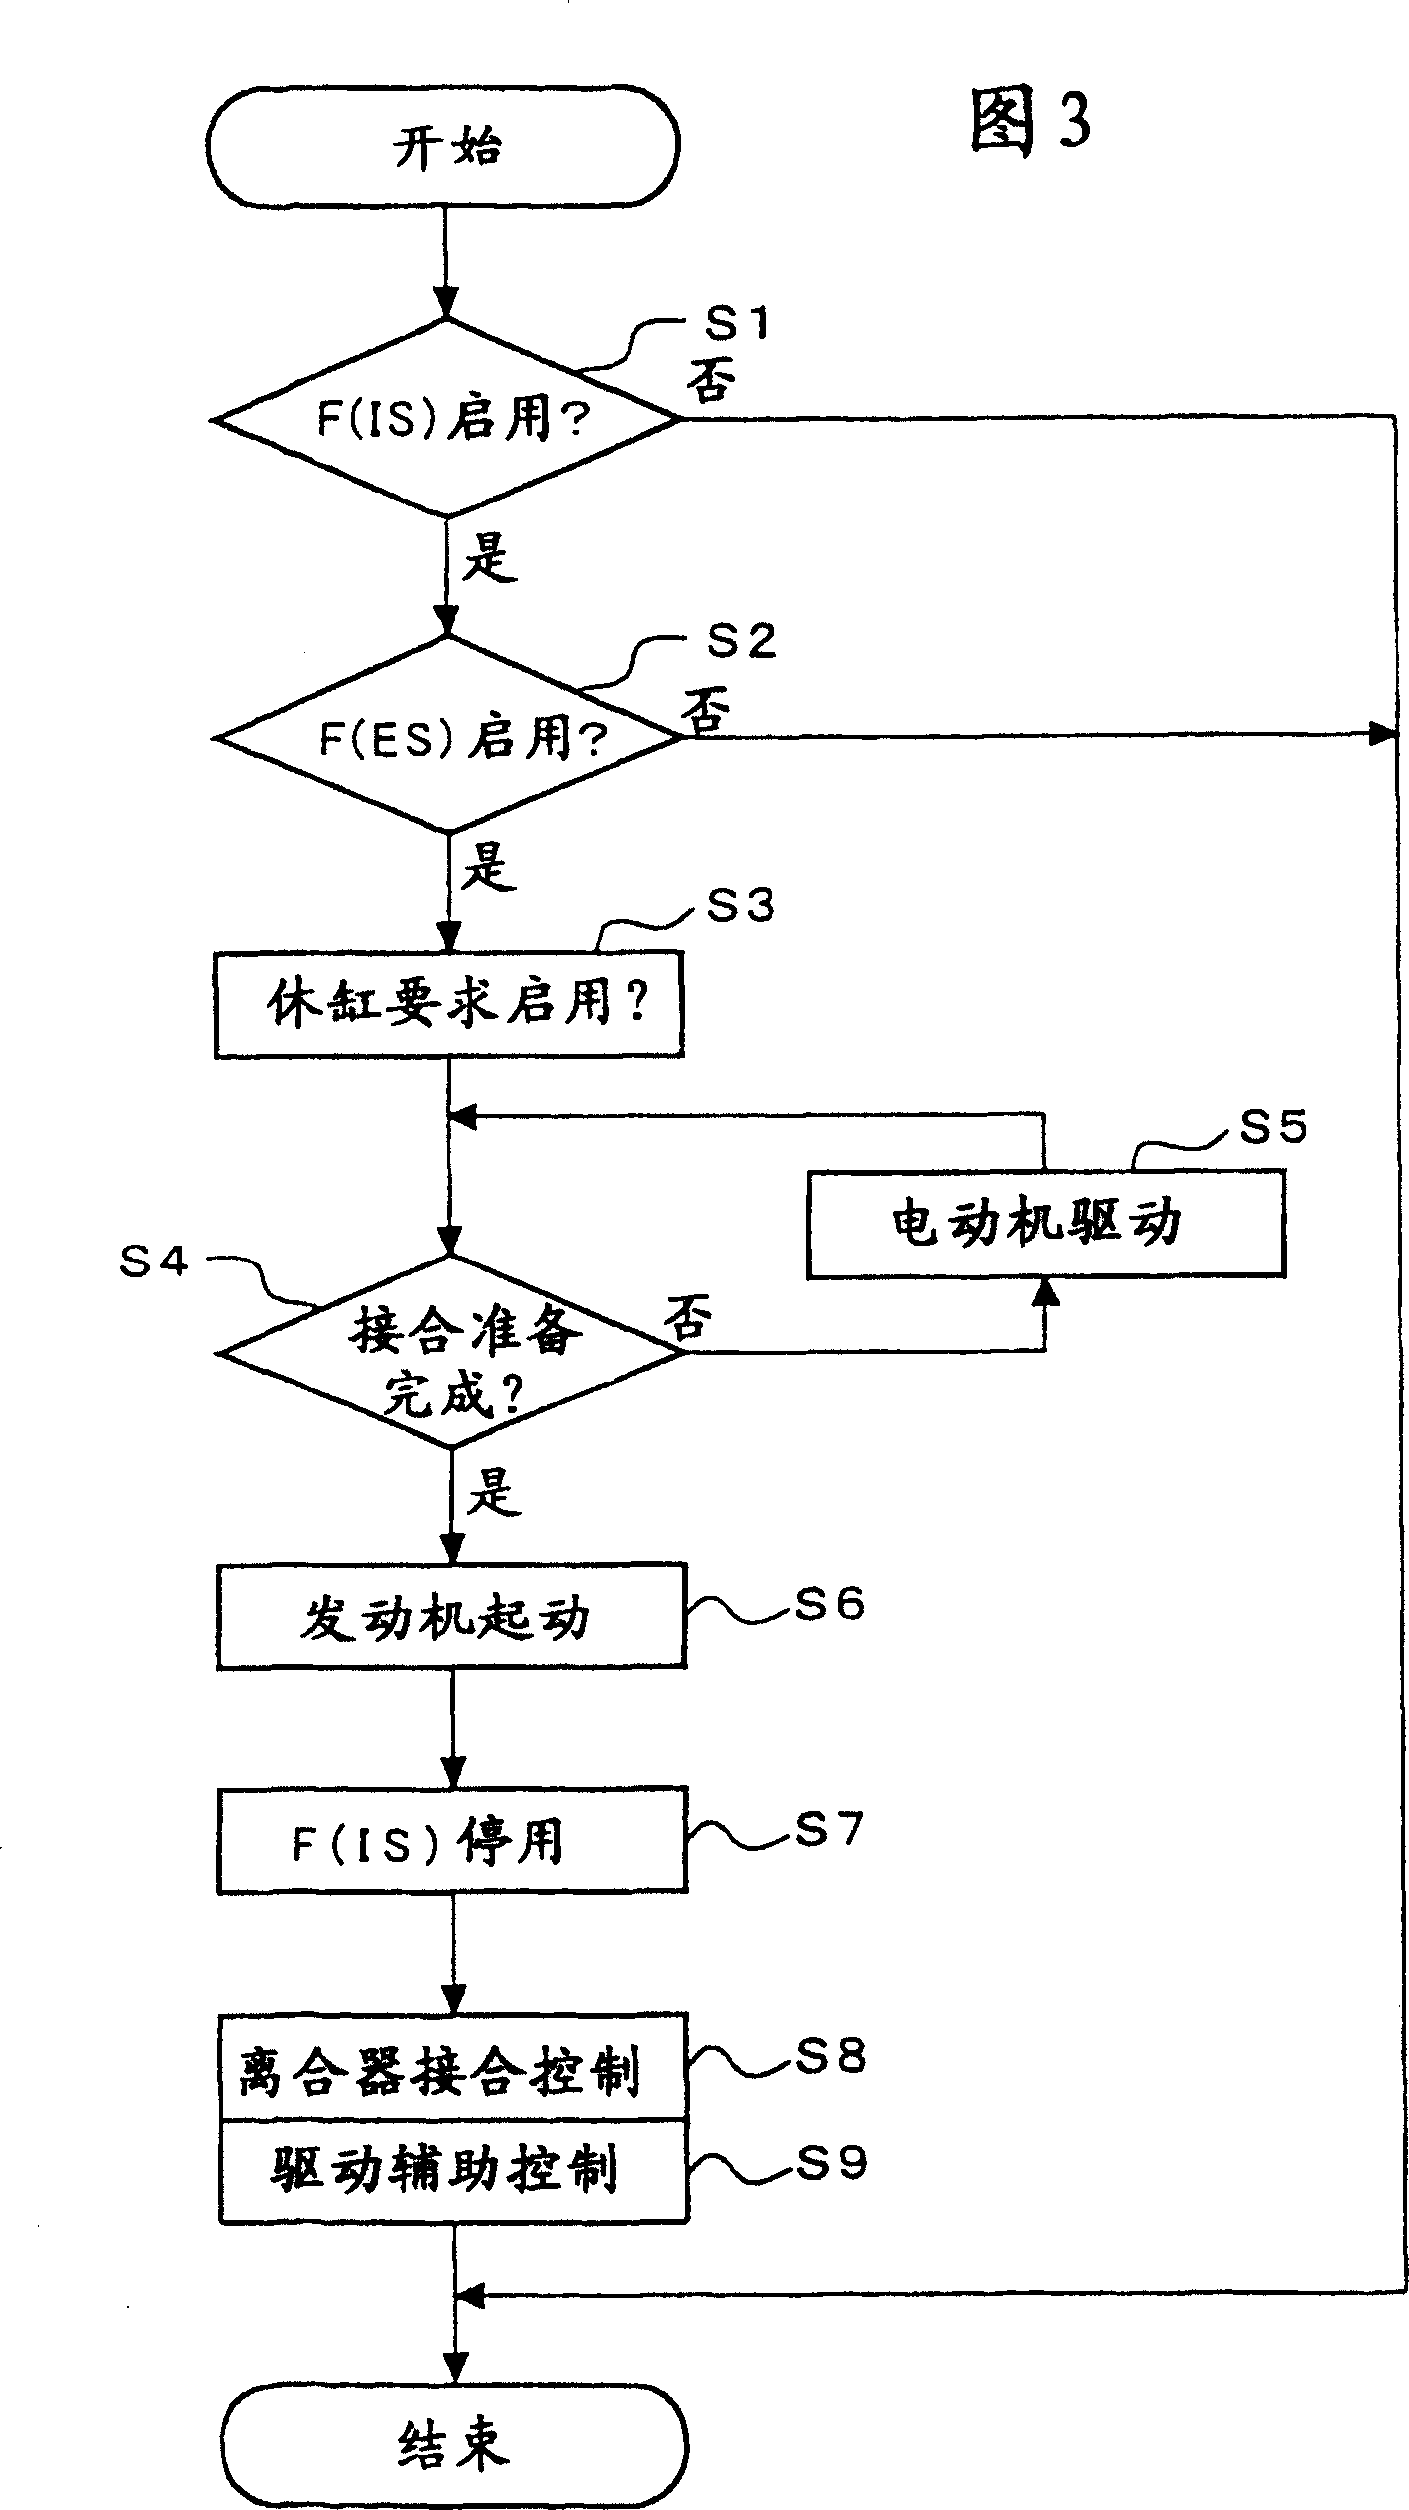 Power transmission controller for vehicle